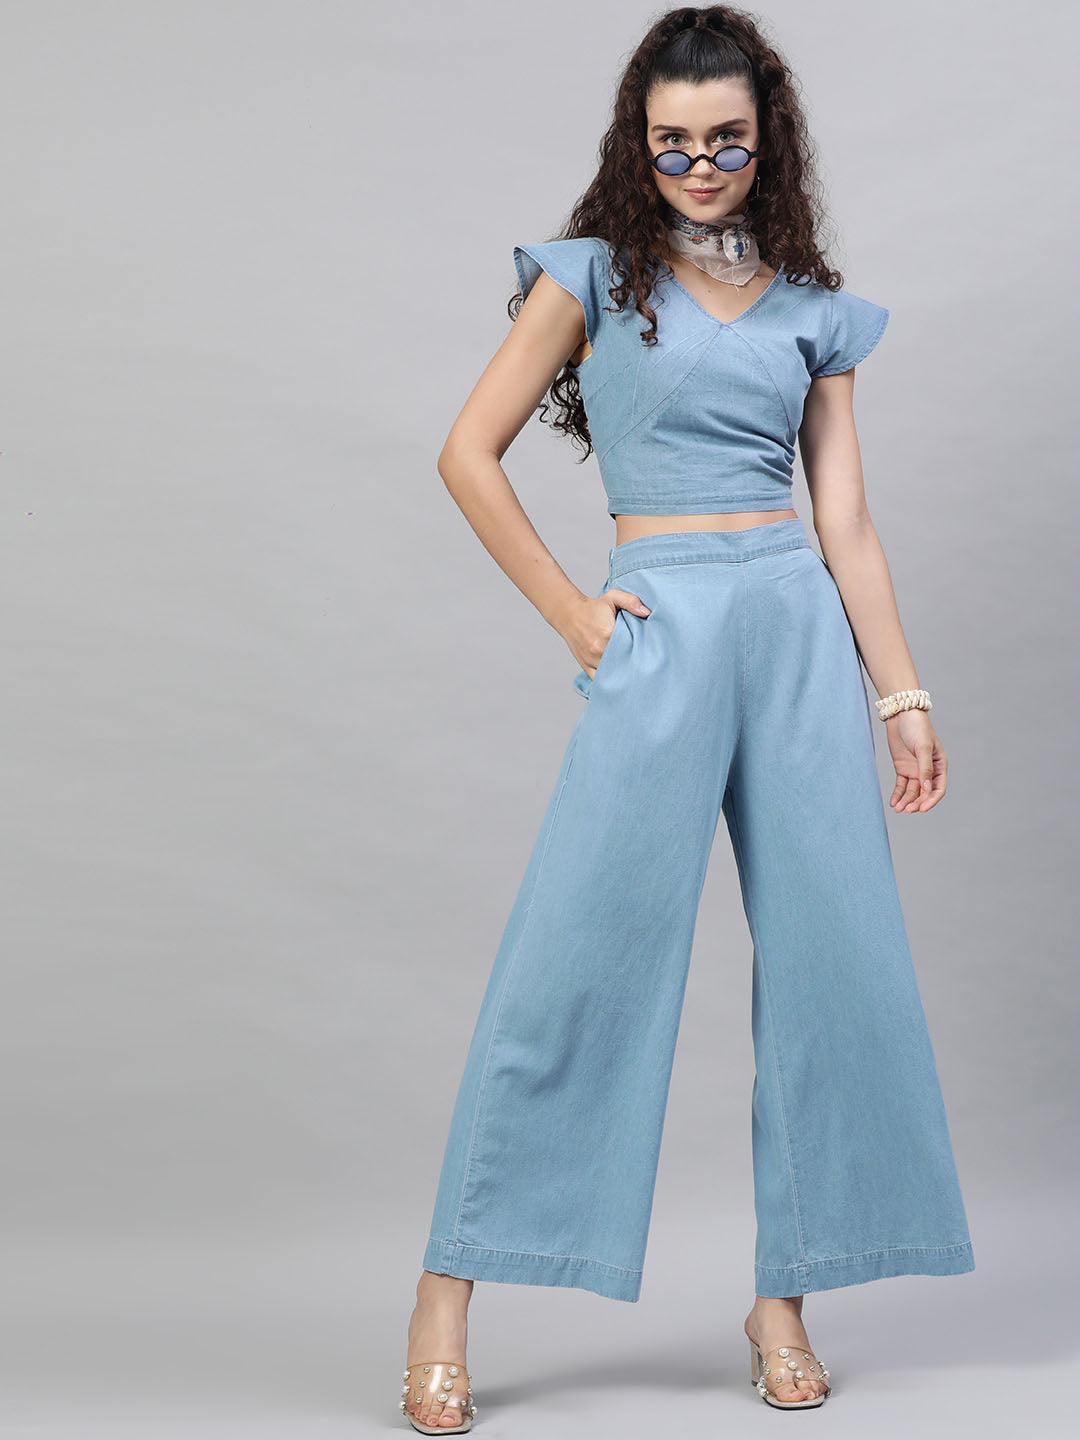 How should I style parallel pants or palazzos for a Western look? - Quora